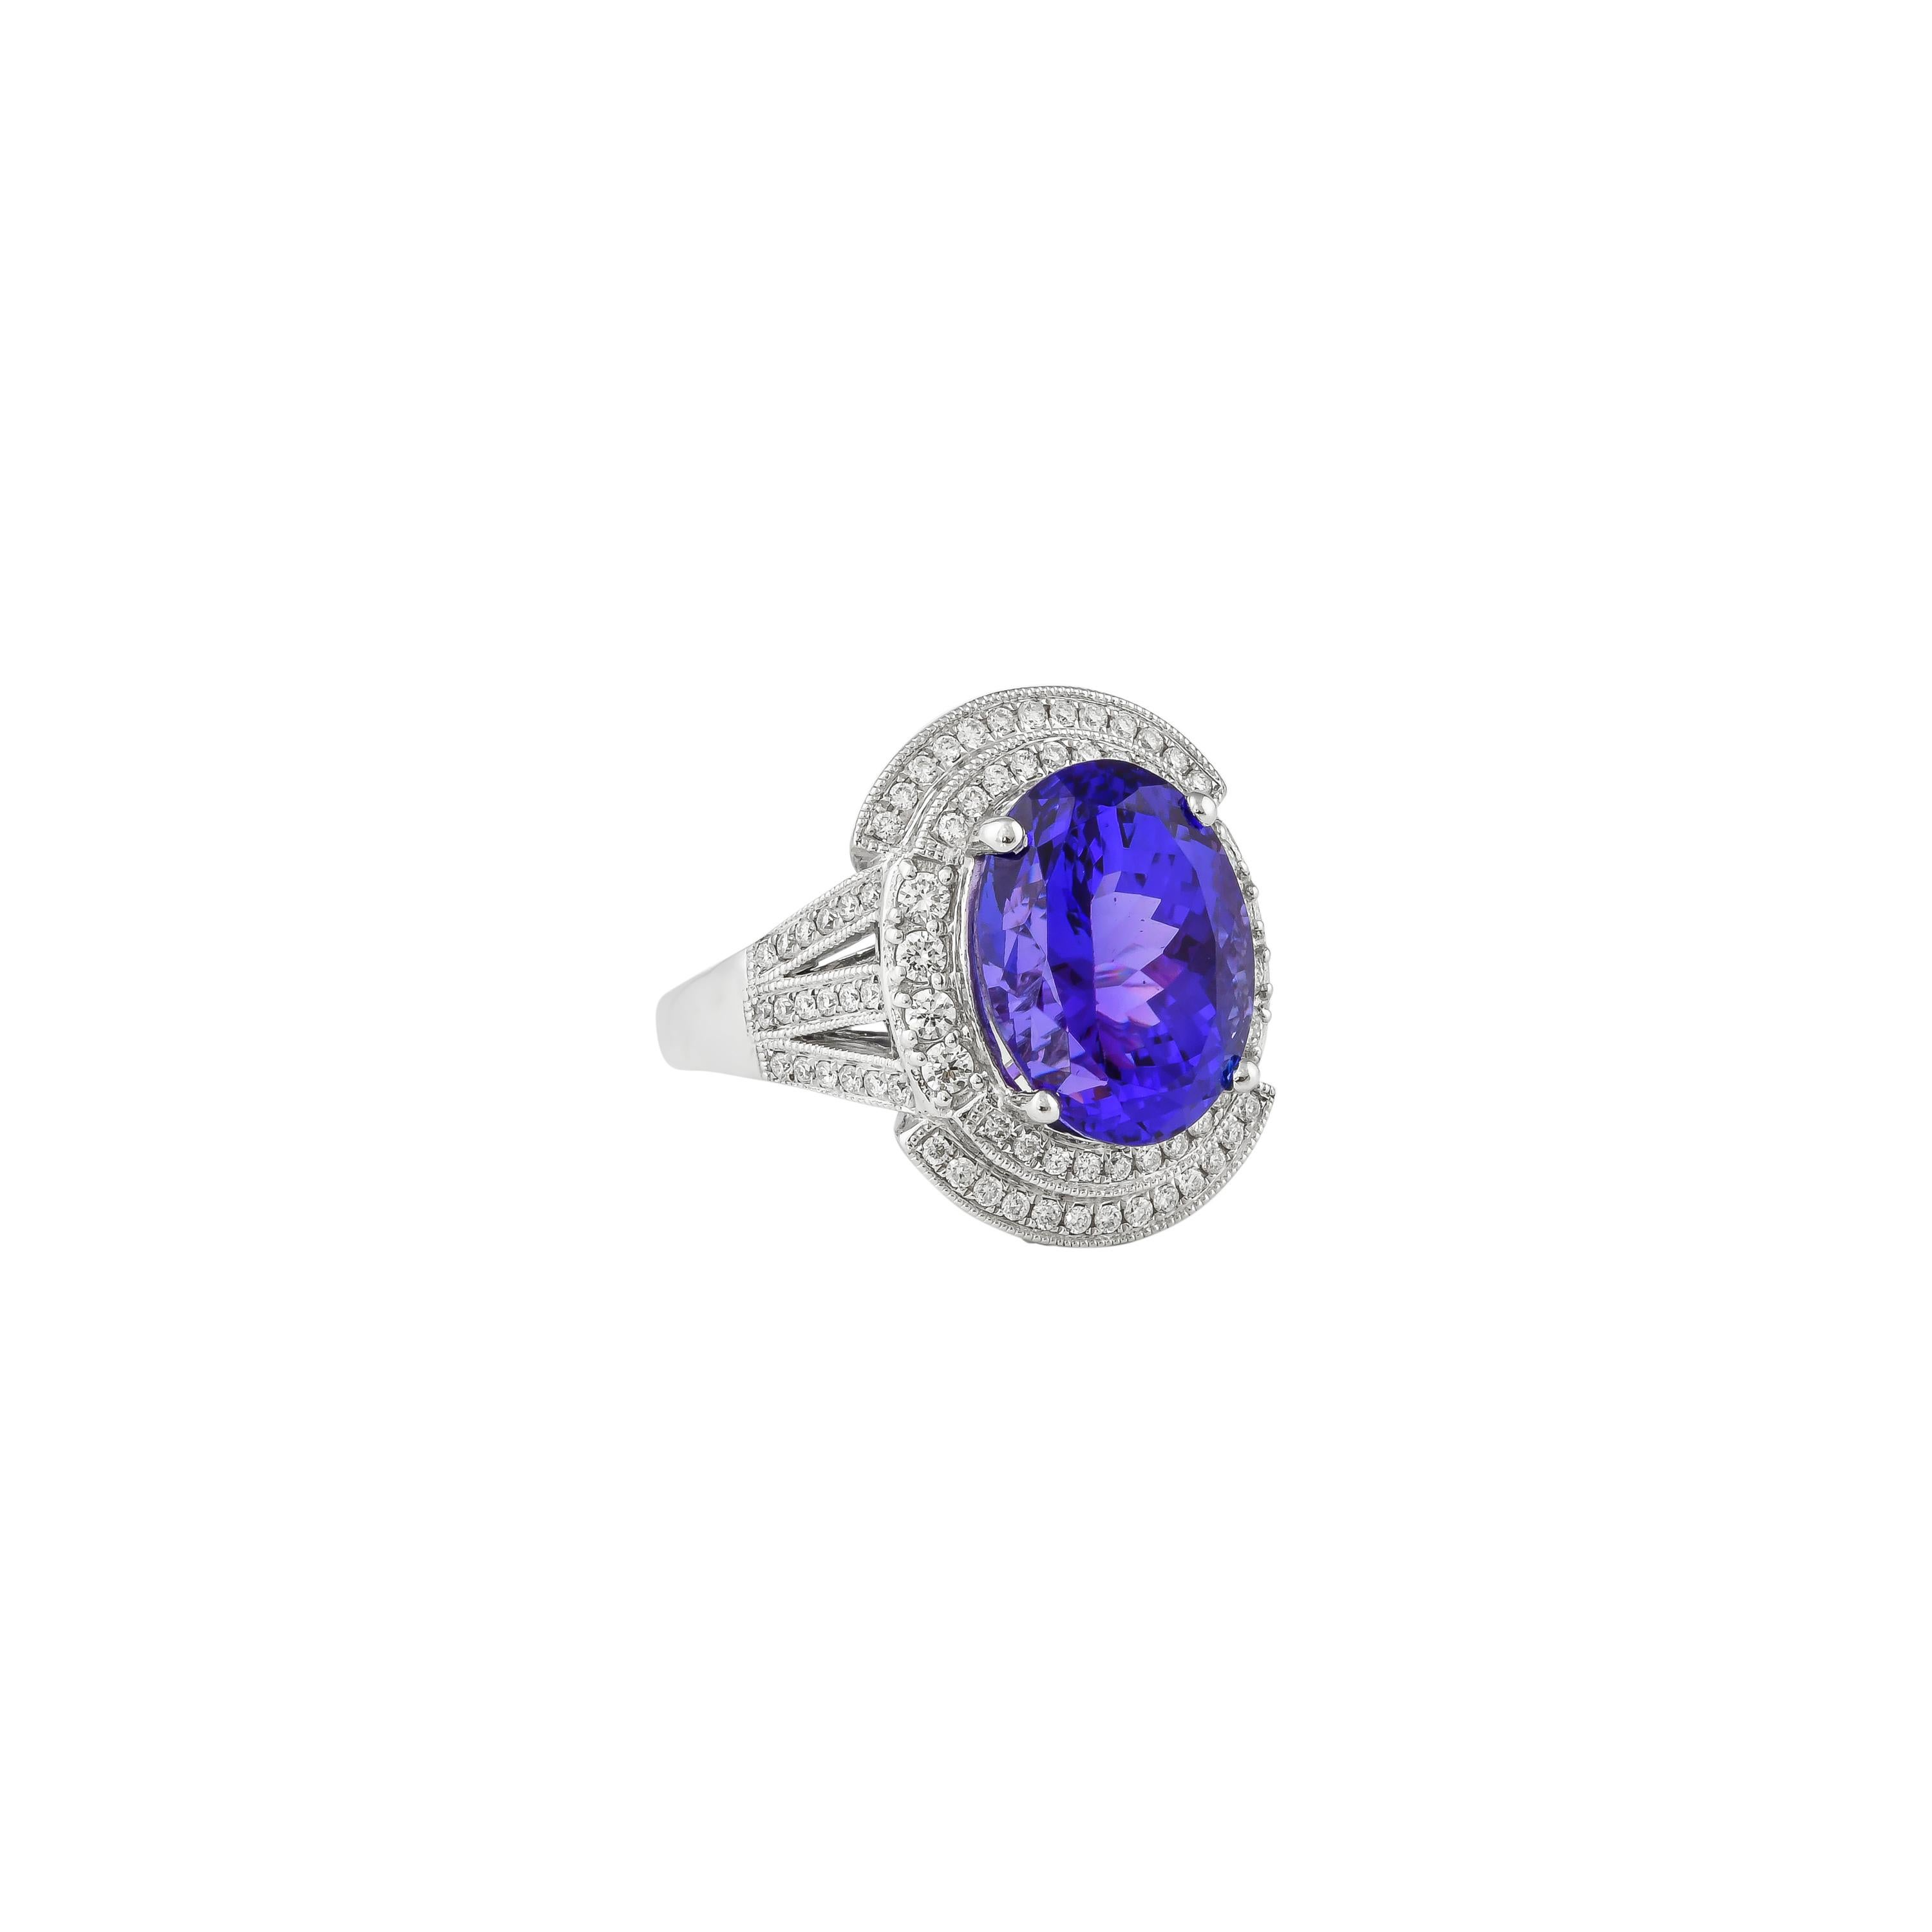 Oval Cut 7.75 Carat Oval Shaped Tanzanite Ring in 18 Karat White Gold with Diamonds For Sale